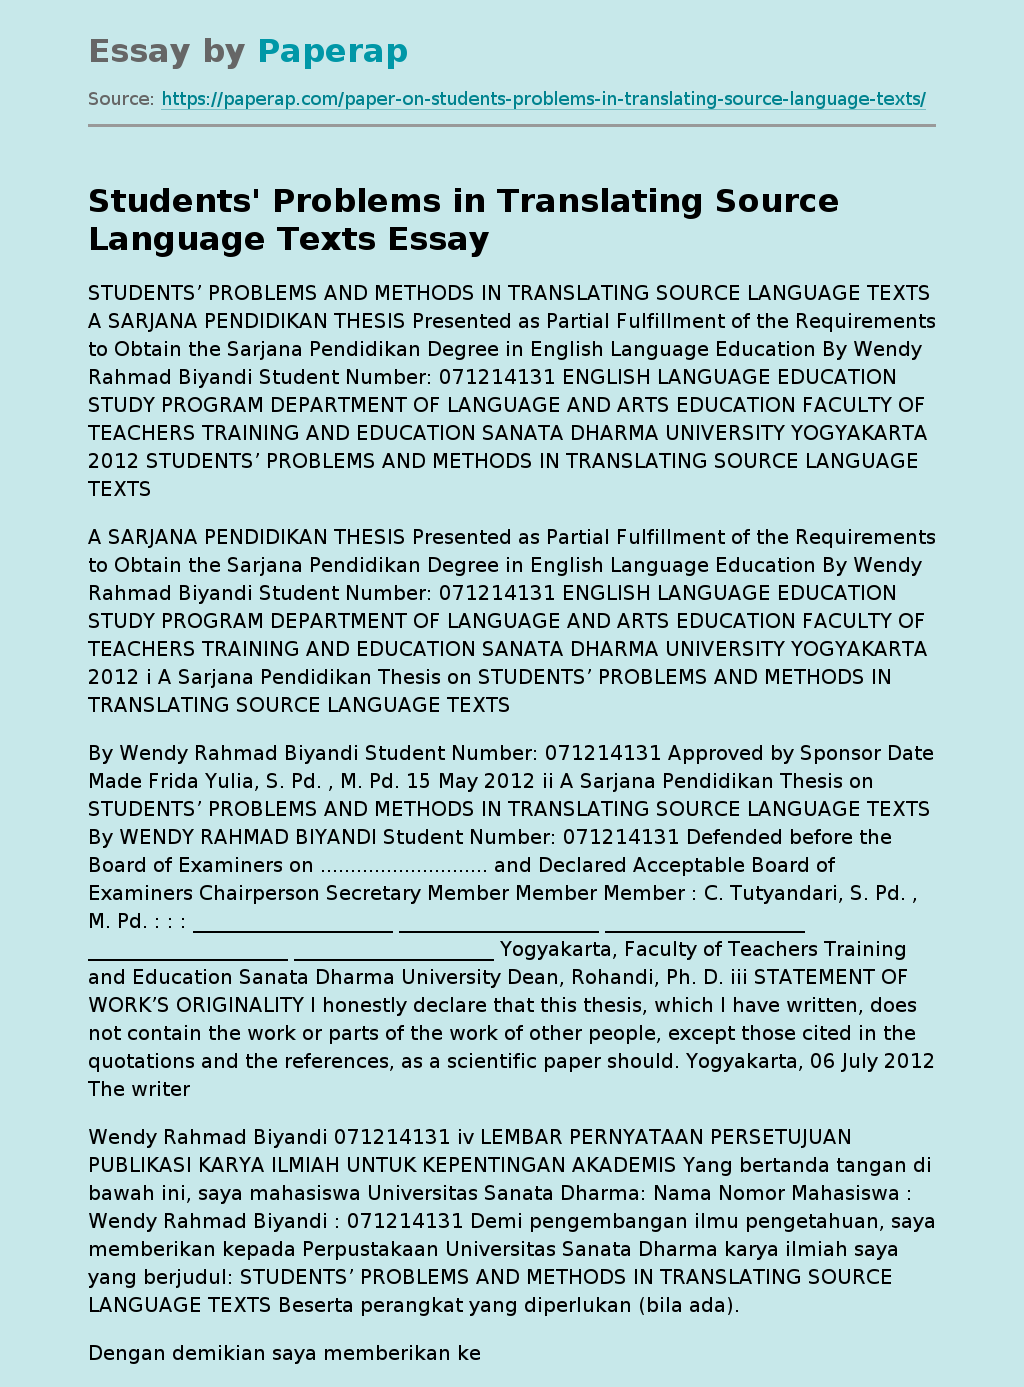 Students' Problems in Translating Source Language Texts